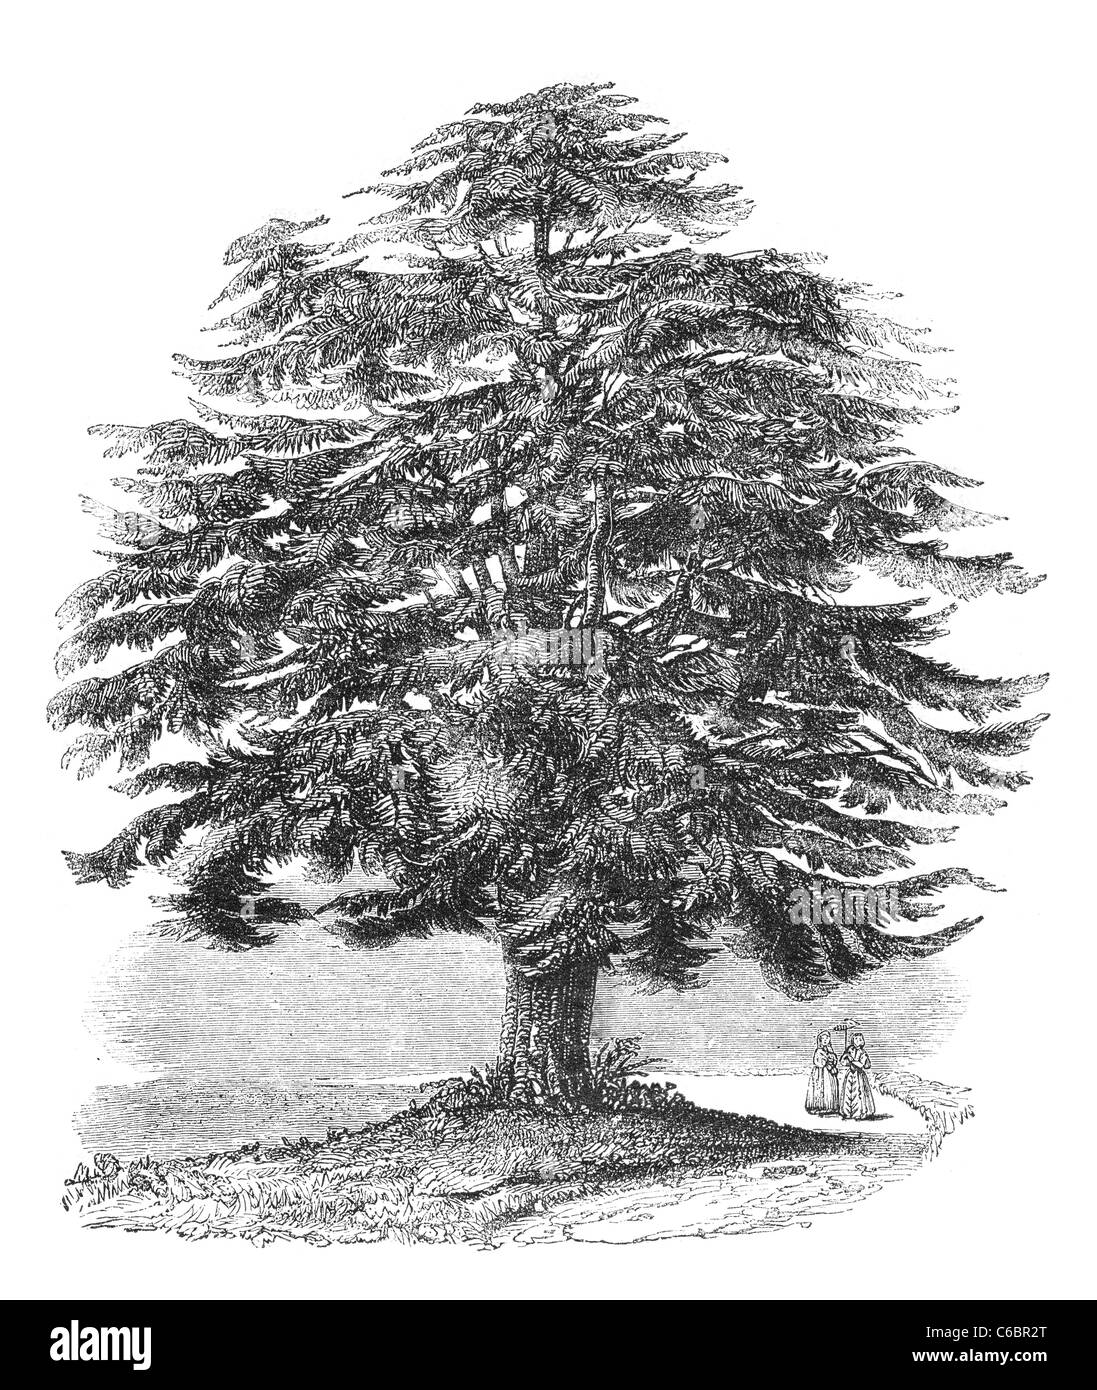 Cedar in the grounds of the late T. N. Longman at Hampstead. Engraving from a british magazine printed in 1843. Stock Photo